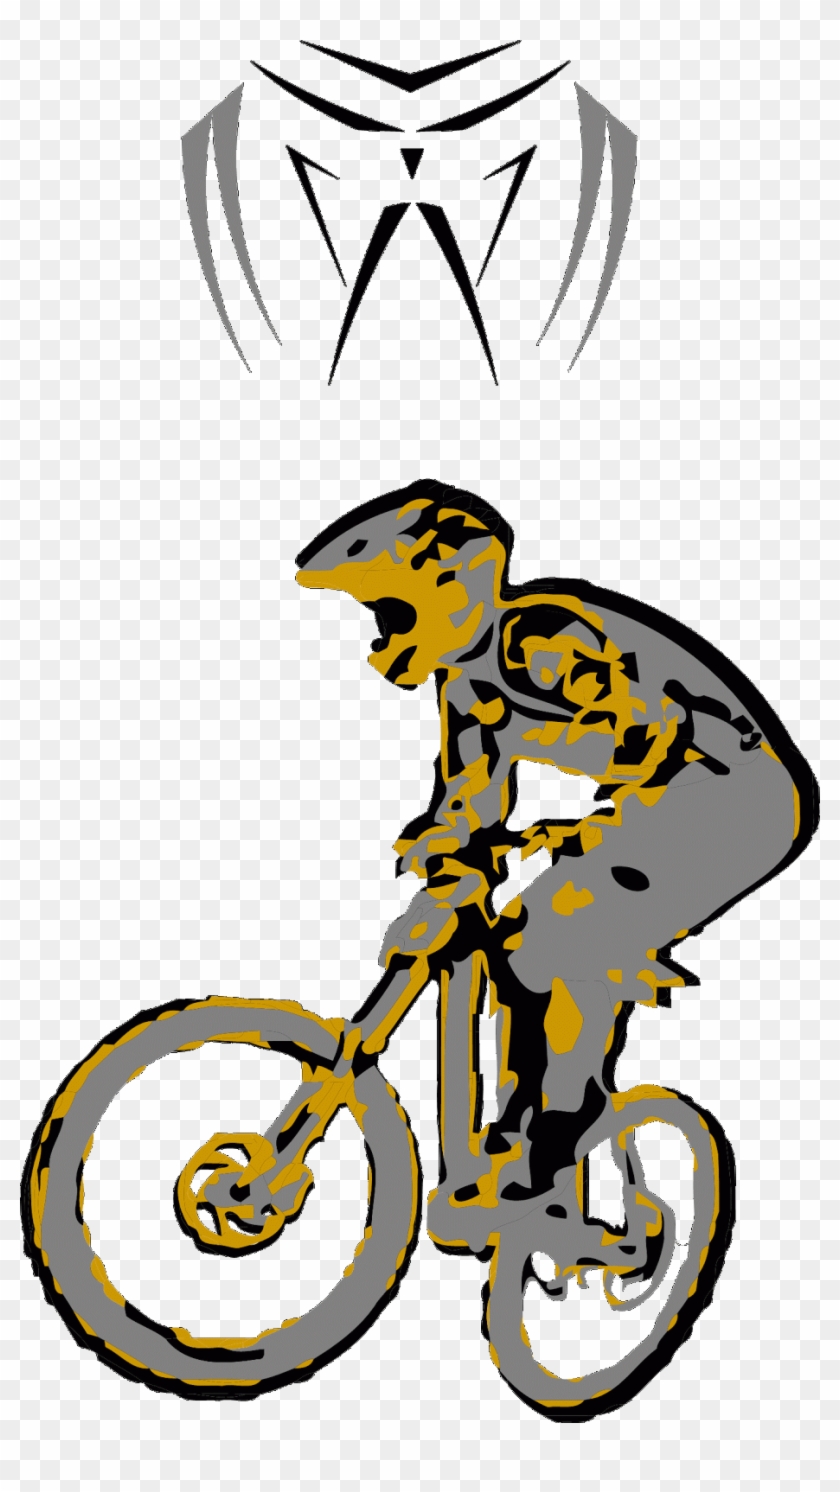 Mountain Bike Downhill Vector - Downhill Mountain Bike - Free Transparent  PNG Clipart Images Download